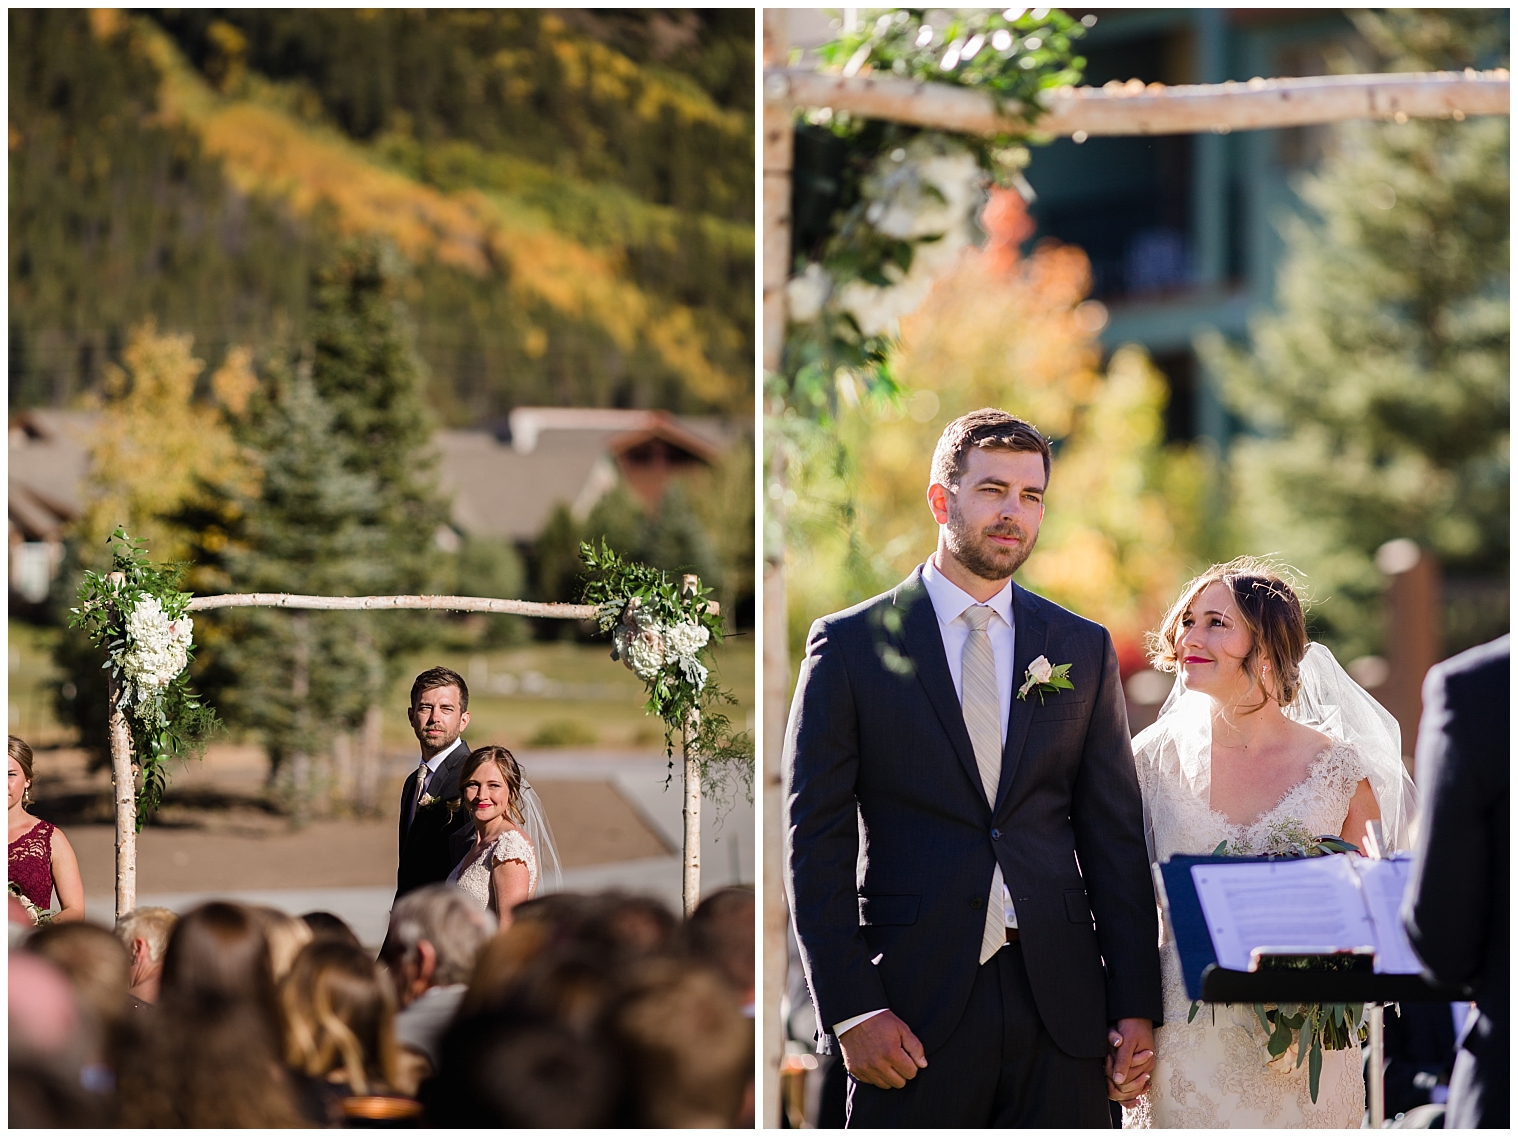 The bride and groom stand together at the altar during their Copper Mountain wedding ceremony.